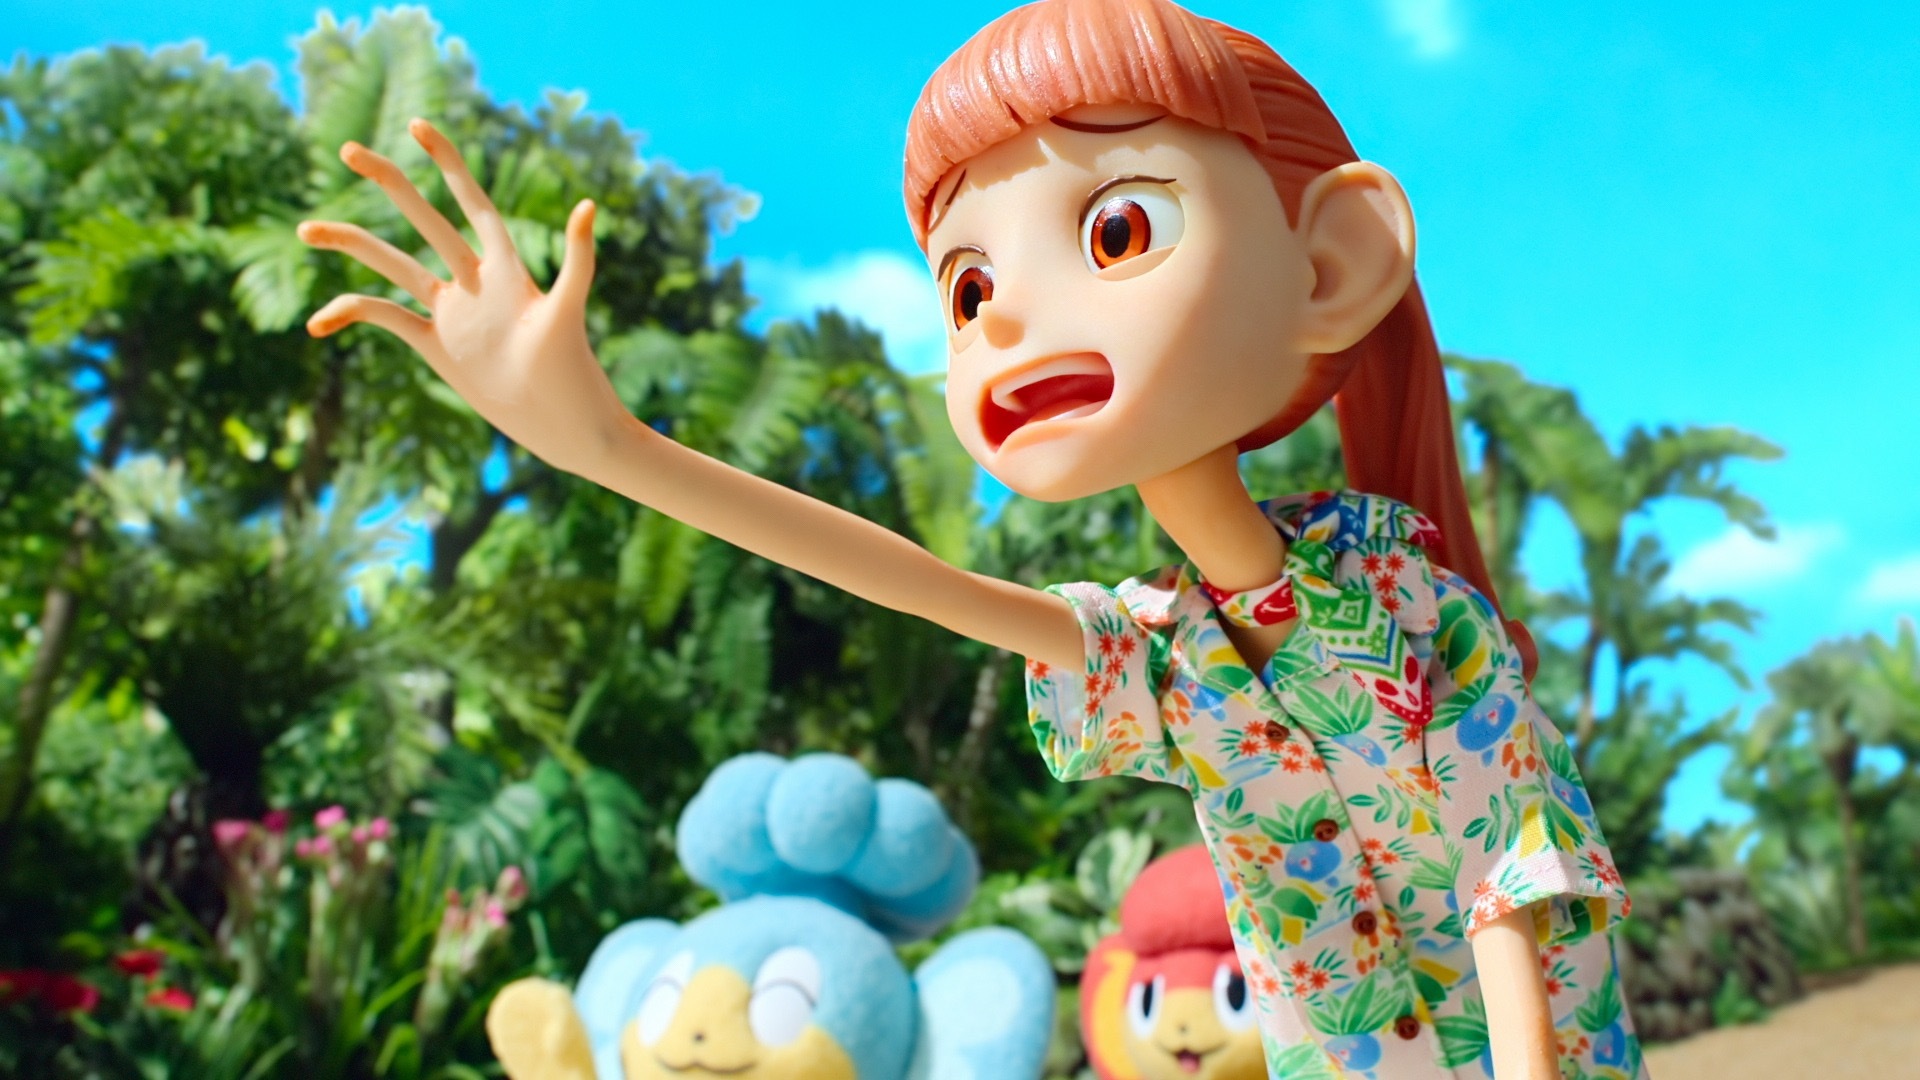 A still from the stop-animation show Pokemon Concierge. Haru reaches out with her hand beyond the camera and looks worried about something in the distance. She’s created with clay and her mouth is wide open in worry.